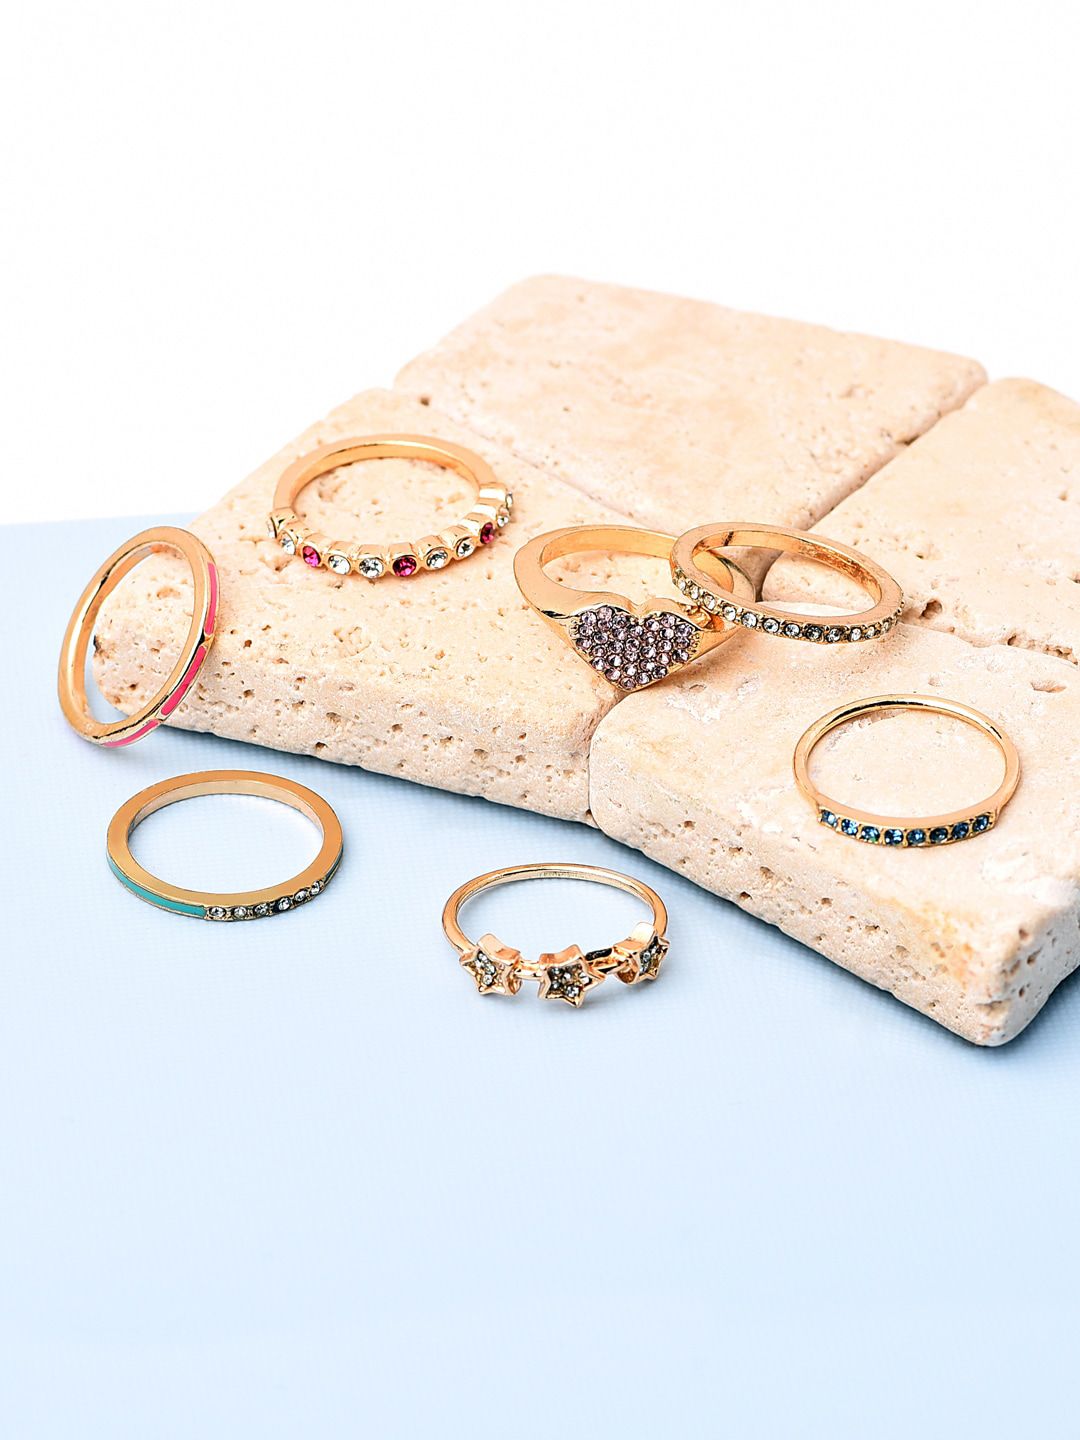 Accessorize Set Of 7 Gold-Toned White Crystal-Studded Finger Rings Price in India